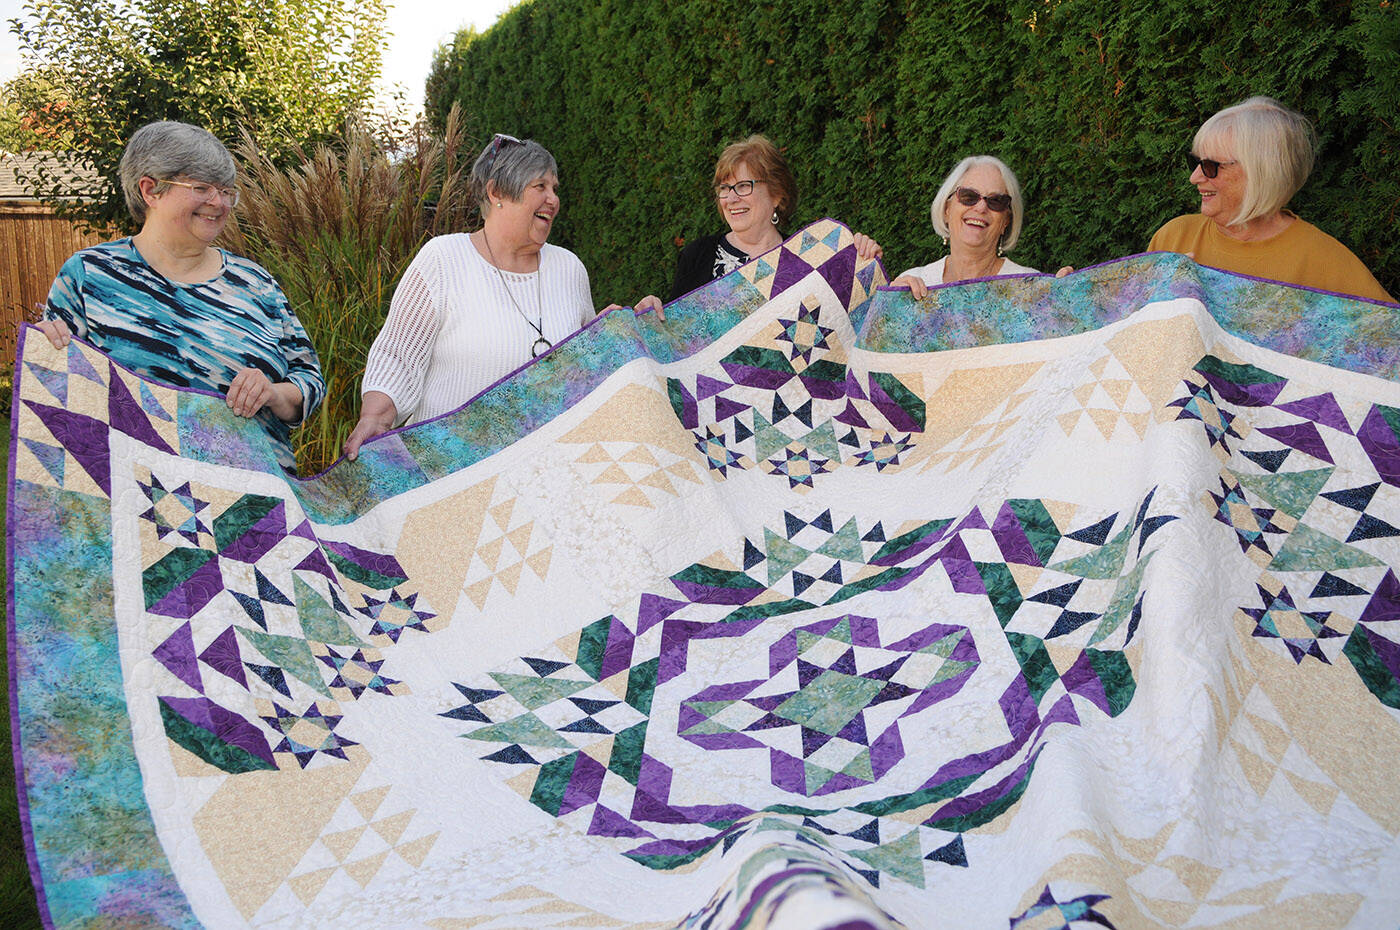 Chilliwack Quilters’ Guild members (from left) Hanne Gidora, Donna Hilton, Darlene Campbell, Shirley Square-Briggs and Kathy Lang hold the quilt that will be raffled off during their biannual show ‘Sew’d to Joy’ which runs Oct. 13 and 14. (Jenna Hauck/ Chilliwack Progress)